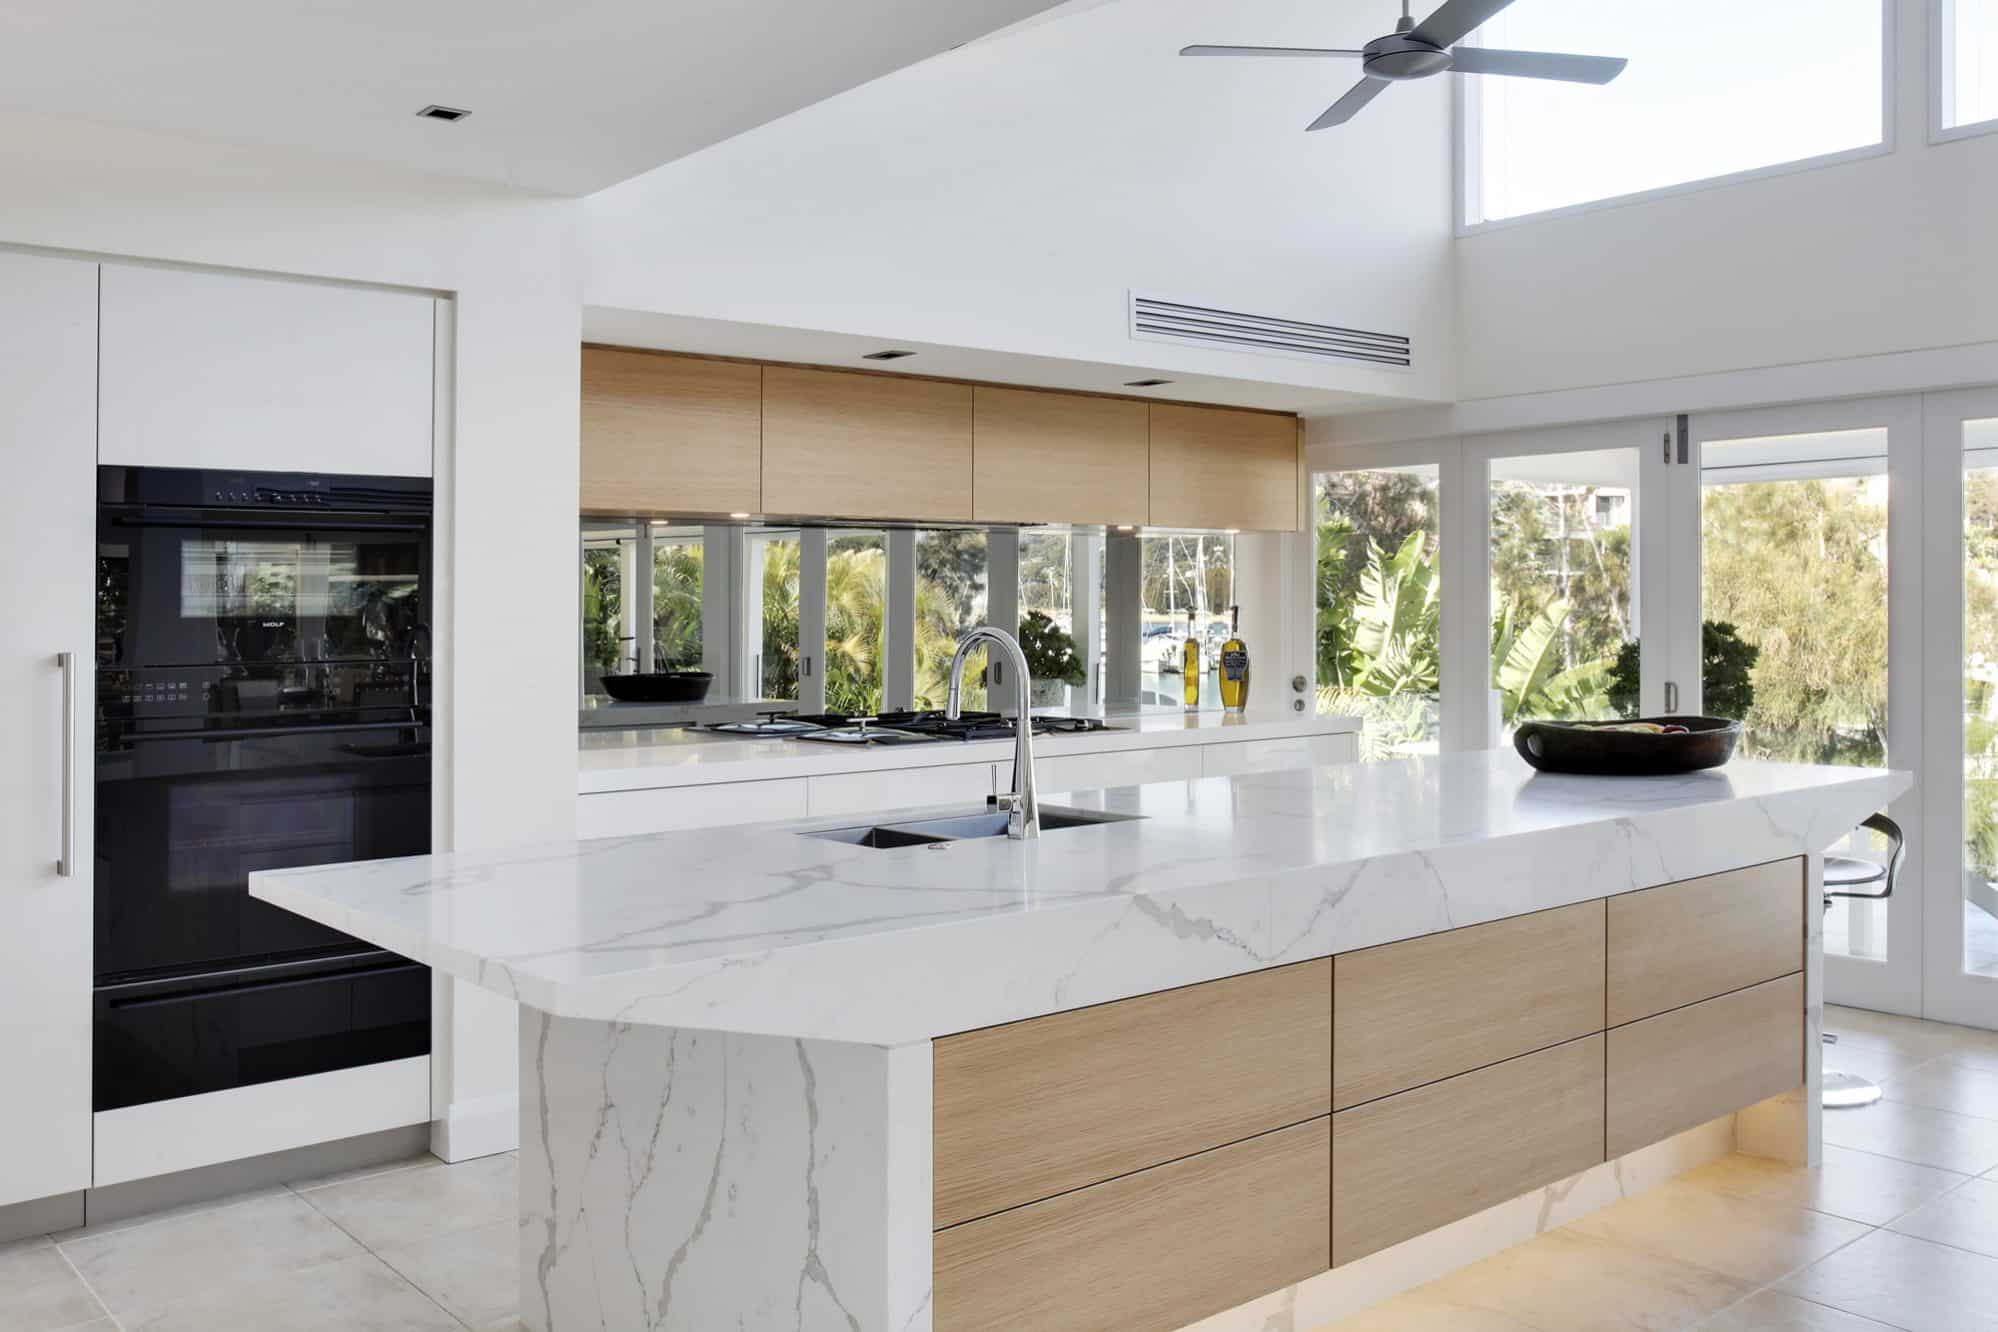 Create a Stunning Kitchen with Our Guide to High-end Designs in South Africa!